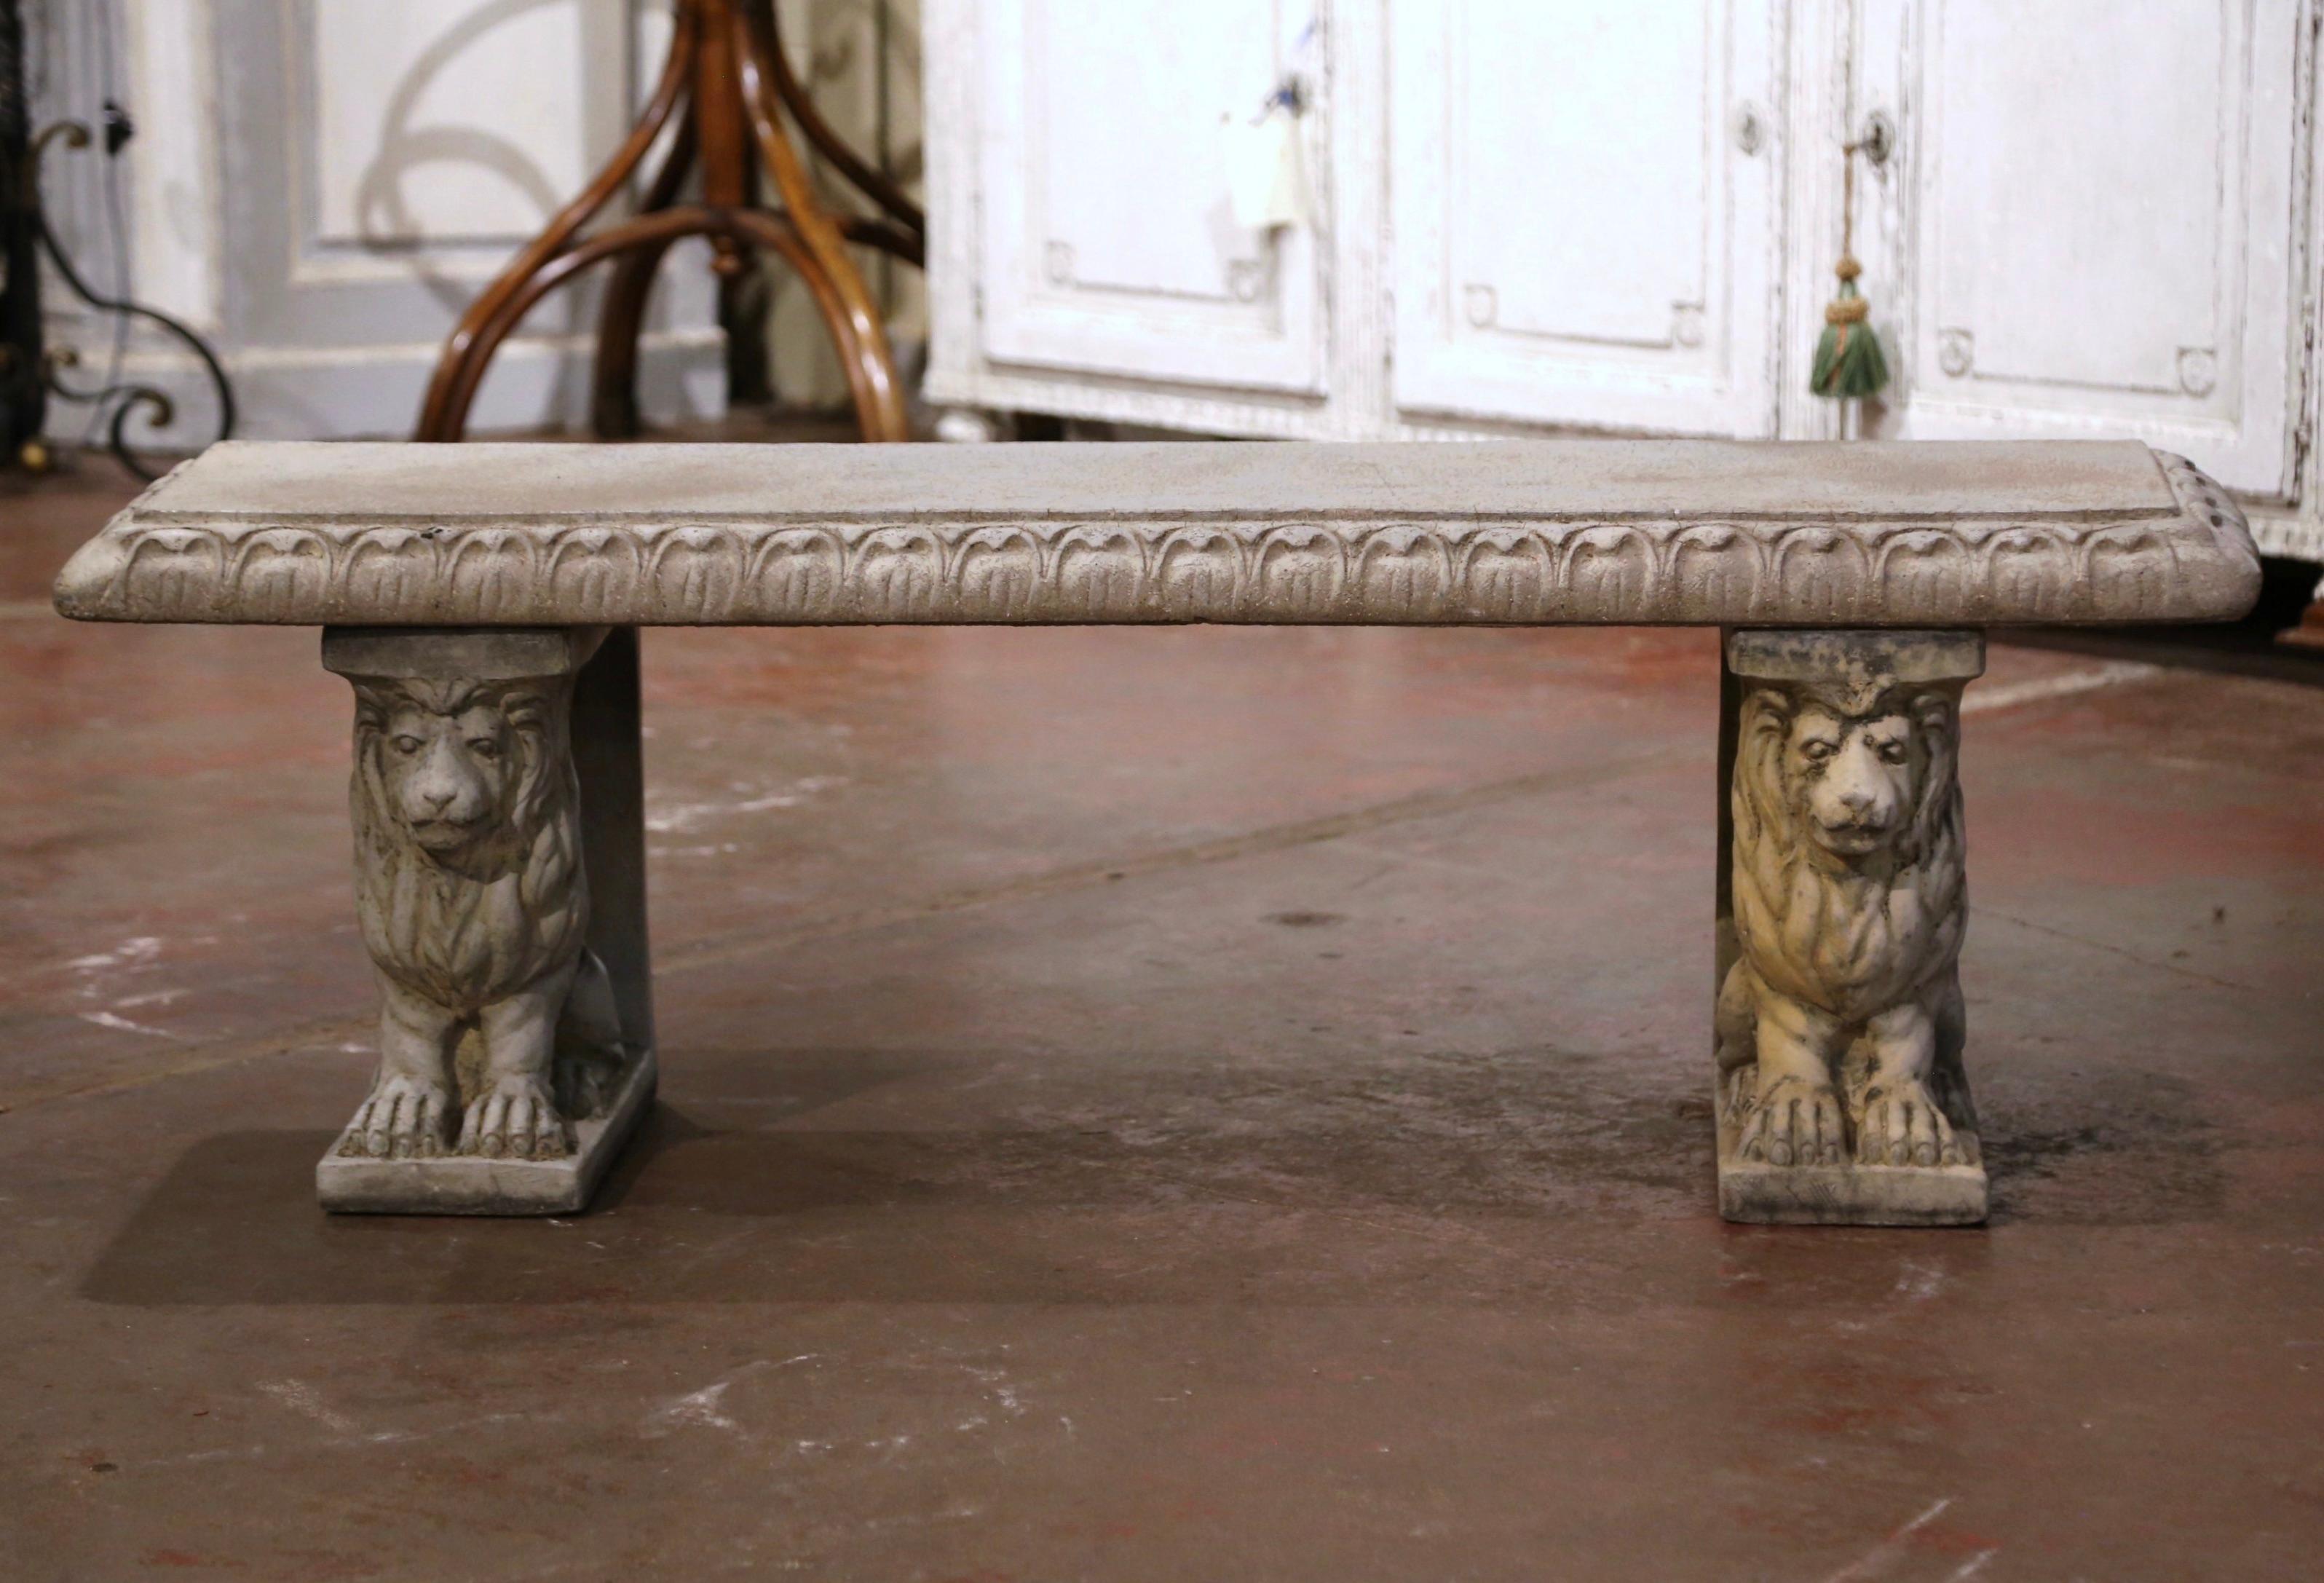 Decorate a garden or a patio with this elegant bench. Crafted in France, circa 1980, the concrete bench stands on two lion figures pedestal bases over a long rectangular seat decorated with geometric motifs along the edges. The rustic seating is in